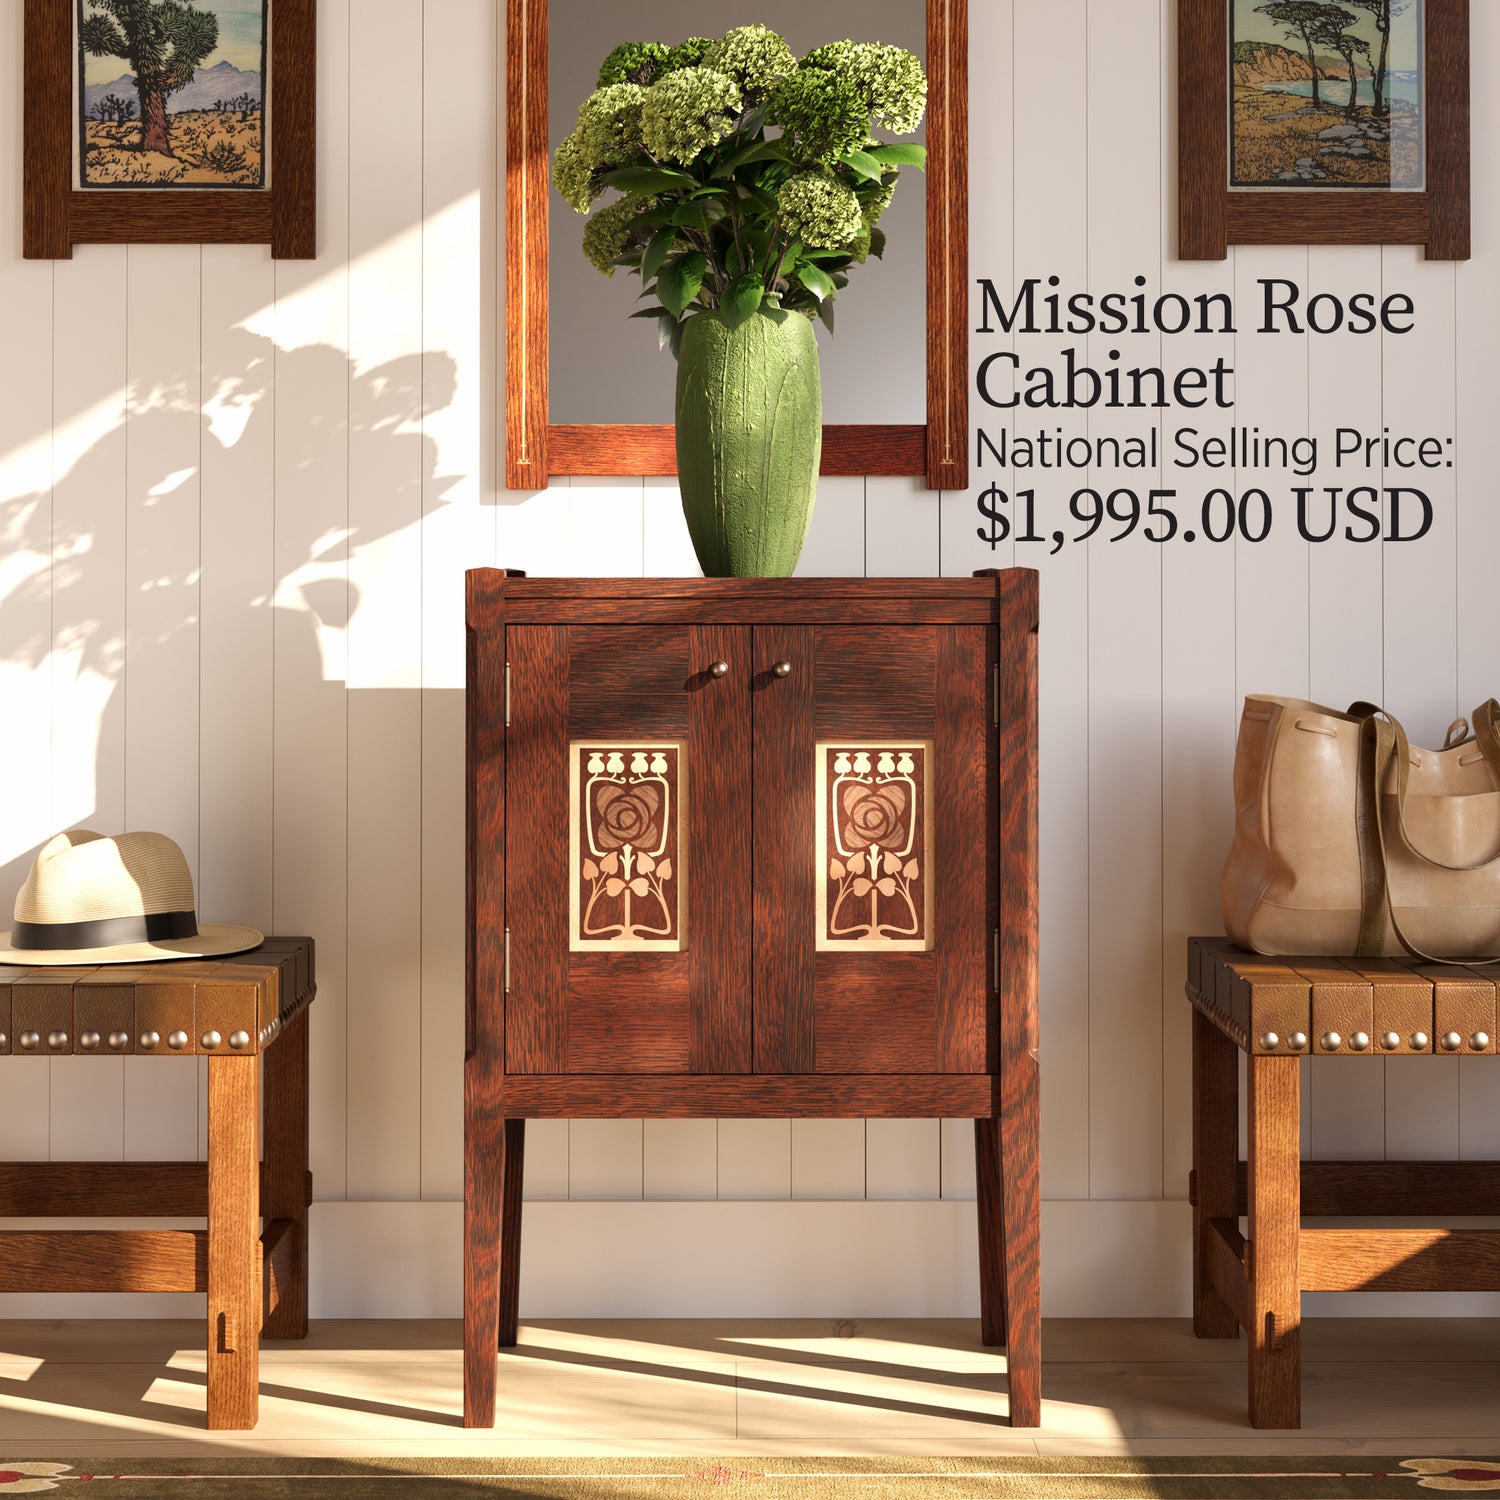 LIfestyle of the Mission Rose Cabinet, National Selling Price: $1,995.00 USD